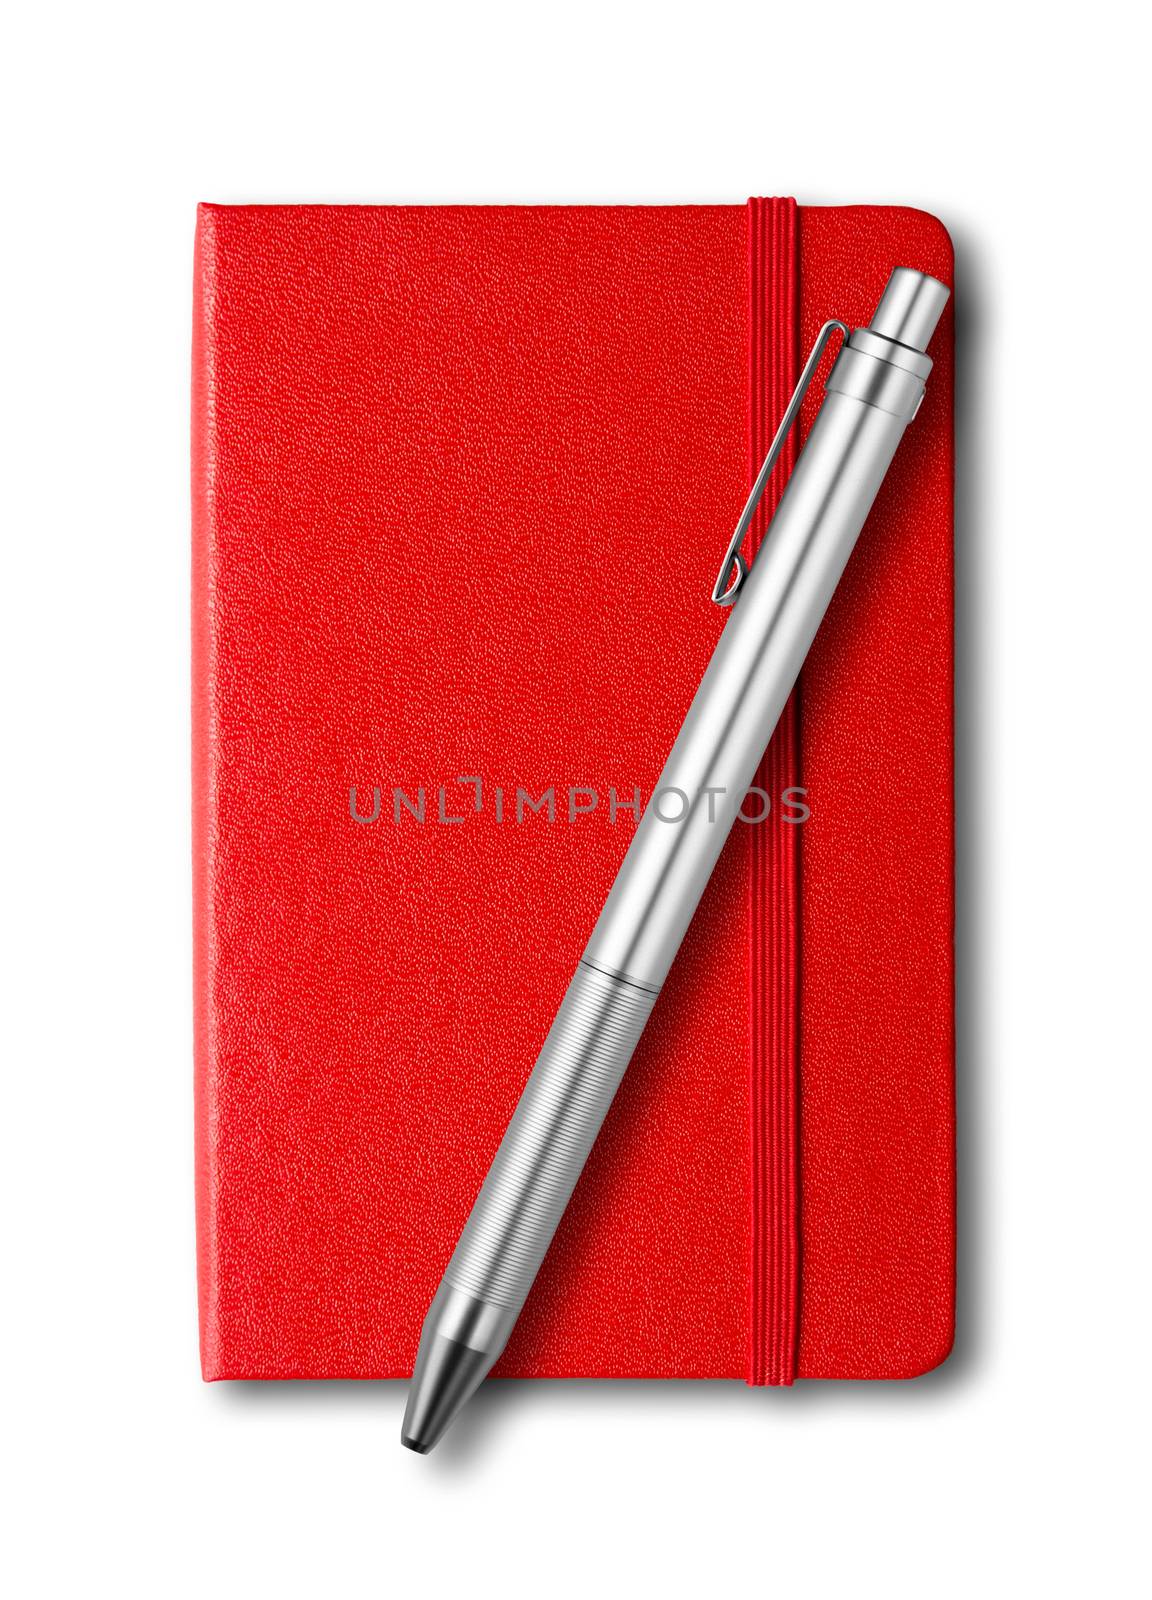 Red closed notebook and pen isolated on white by daboost